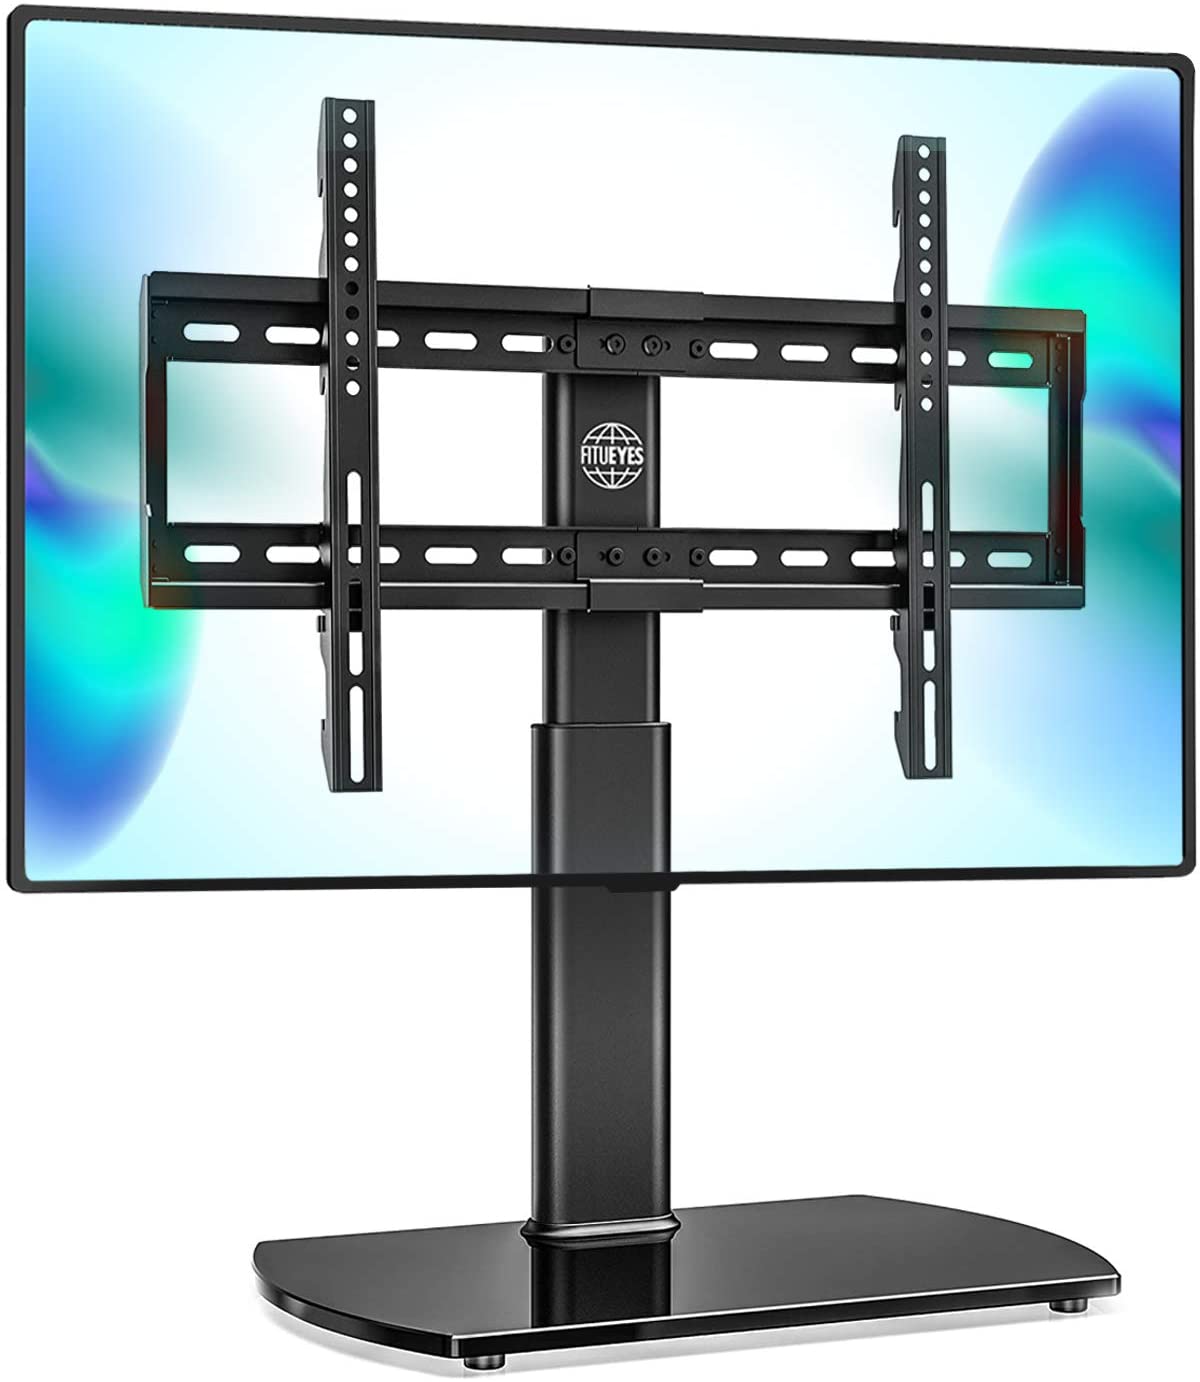 Fitueyes Universal TV Stand Review: A Minimalist Floor Stand